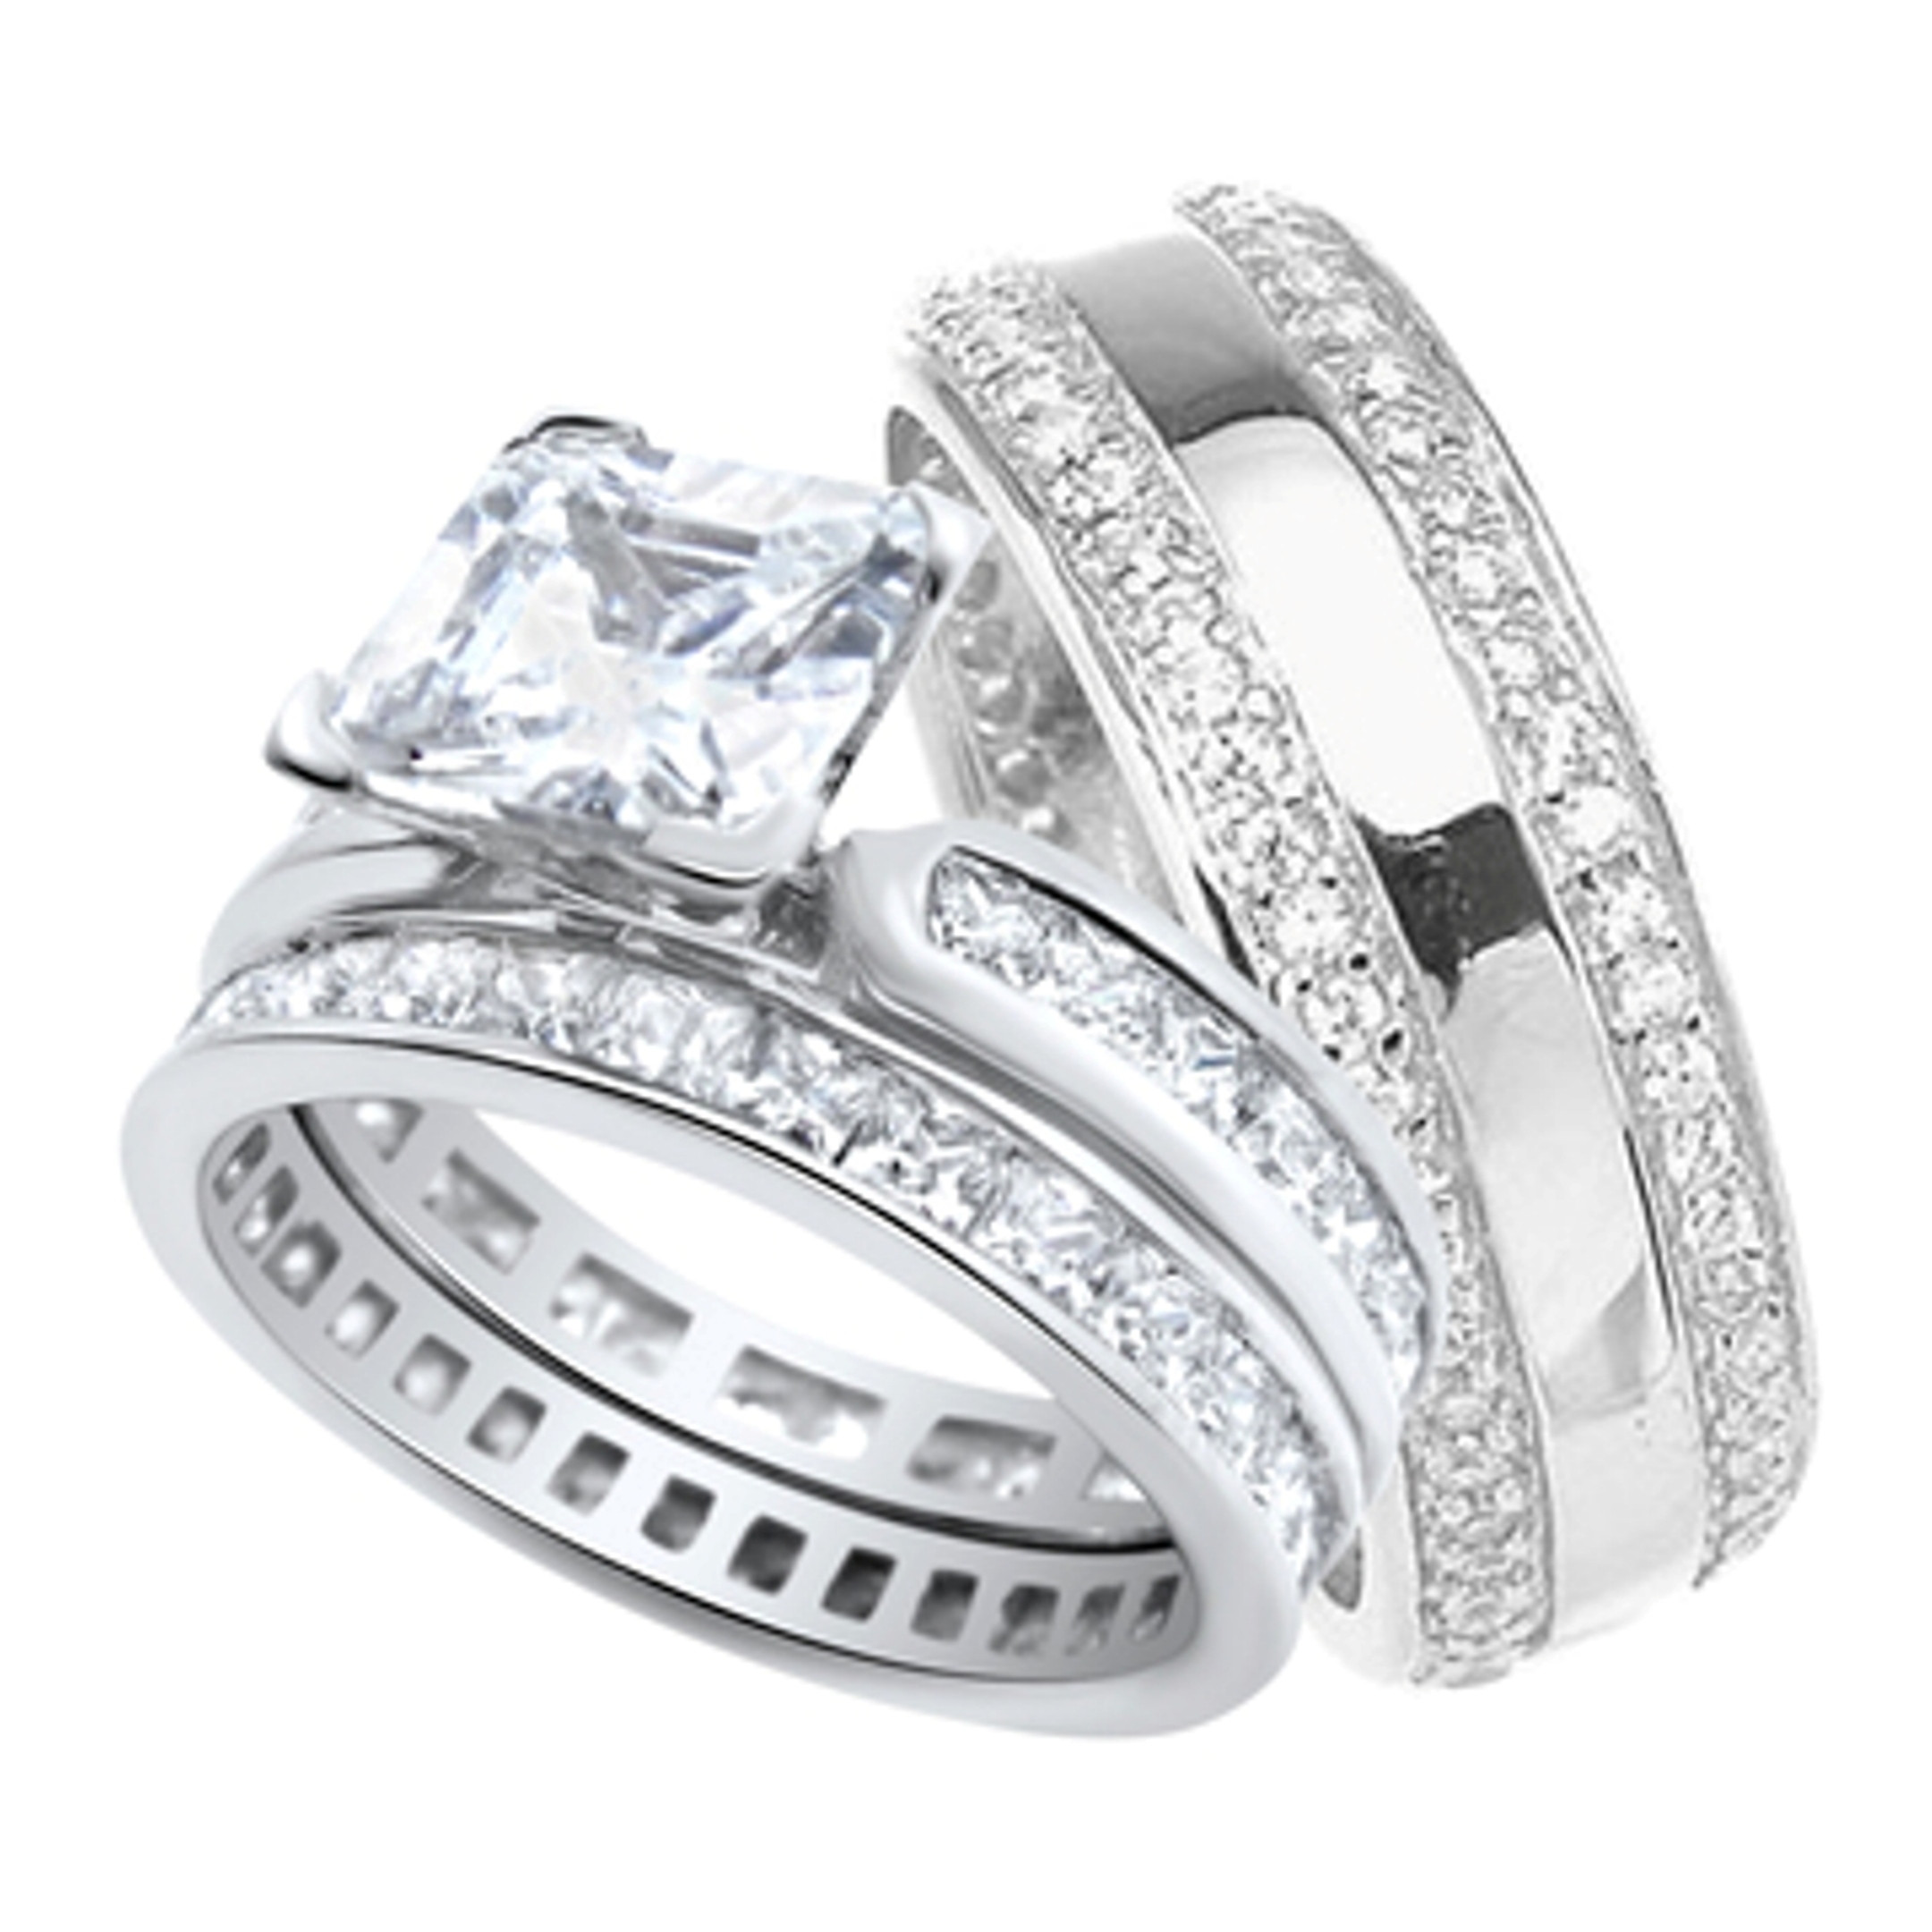 Walmart Wedding Rings Sets For Him And Her
 His and Hers Wedding Ring Set Matching Sterling Silver